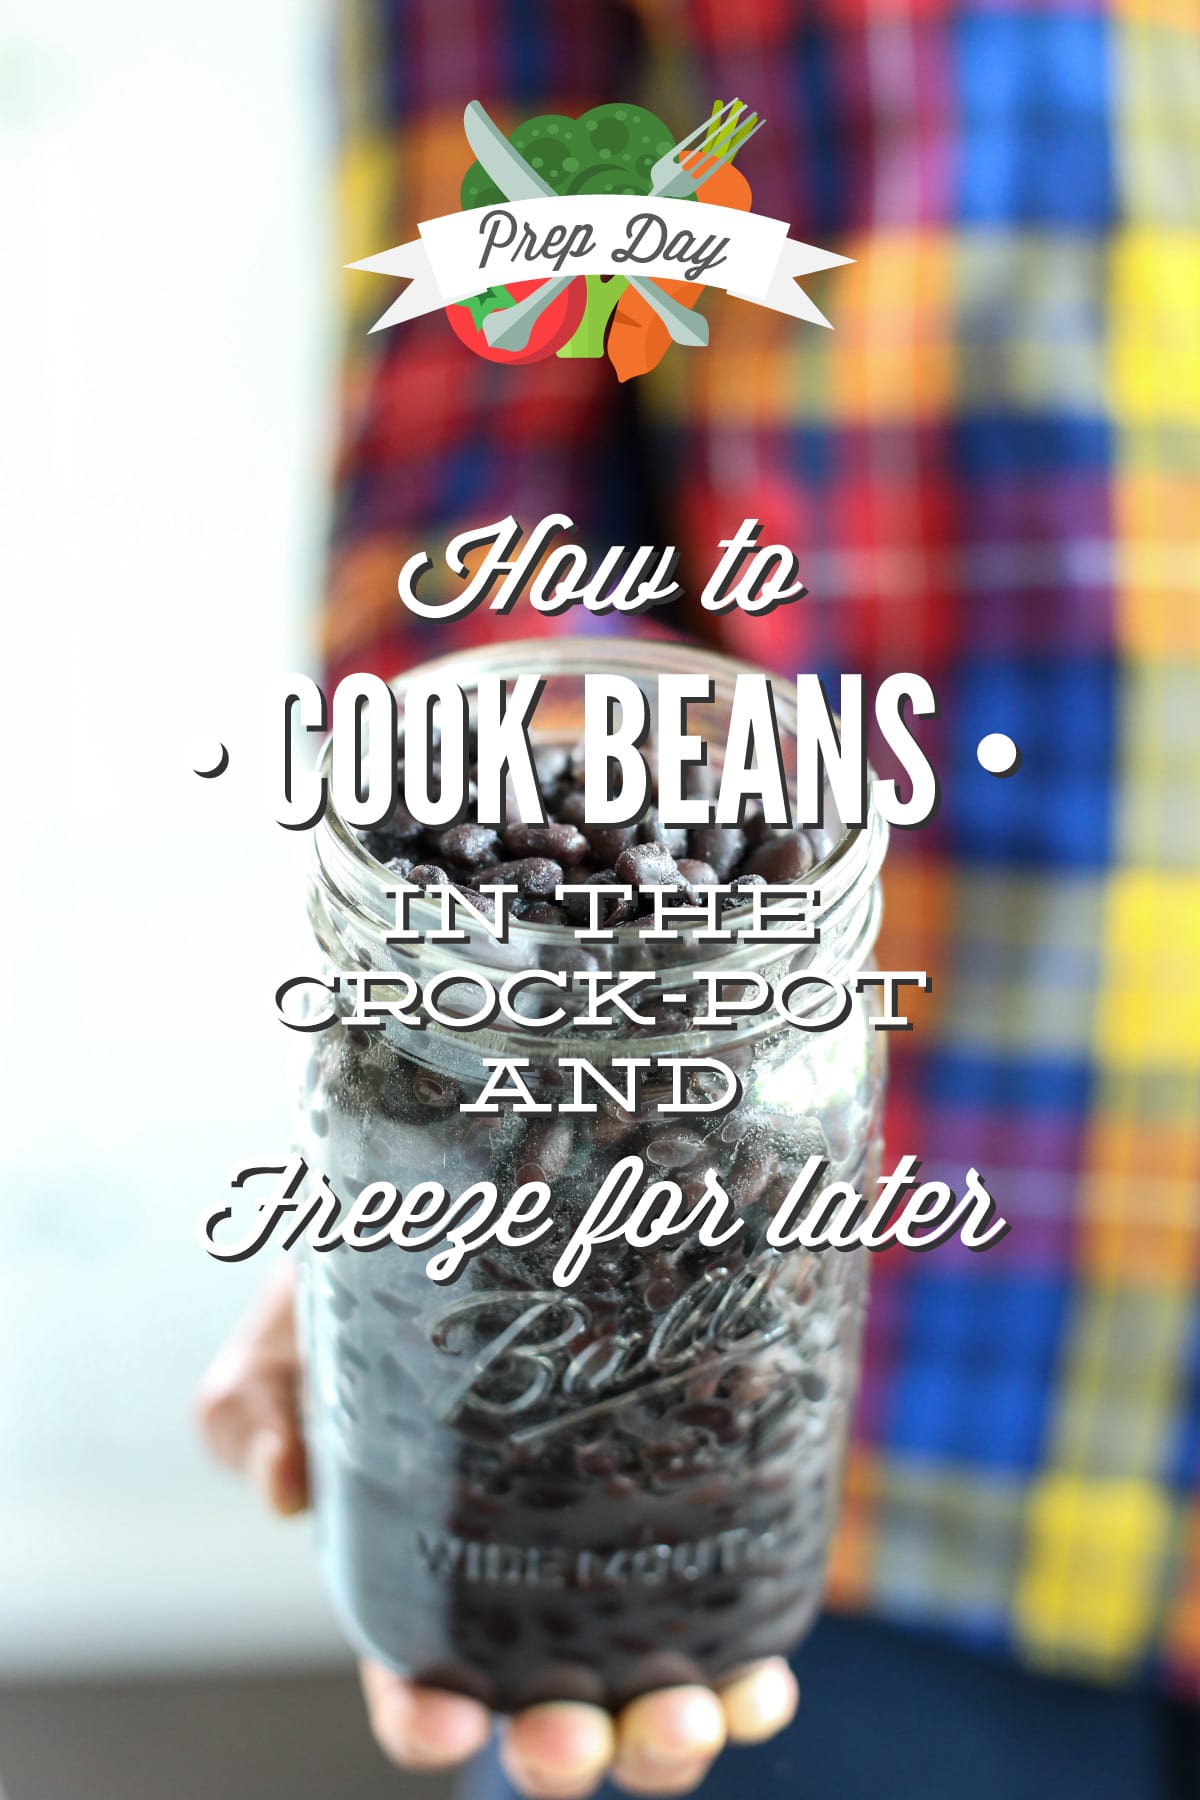 Prep Day: How to Cook Beans in the Crock-Pot and Freeze for Later